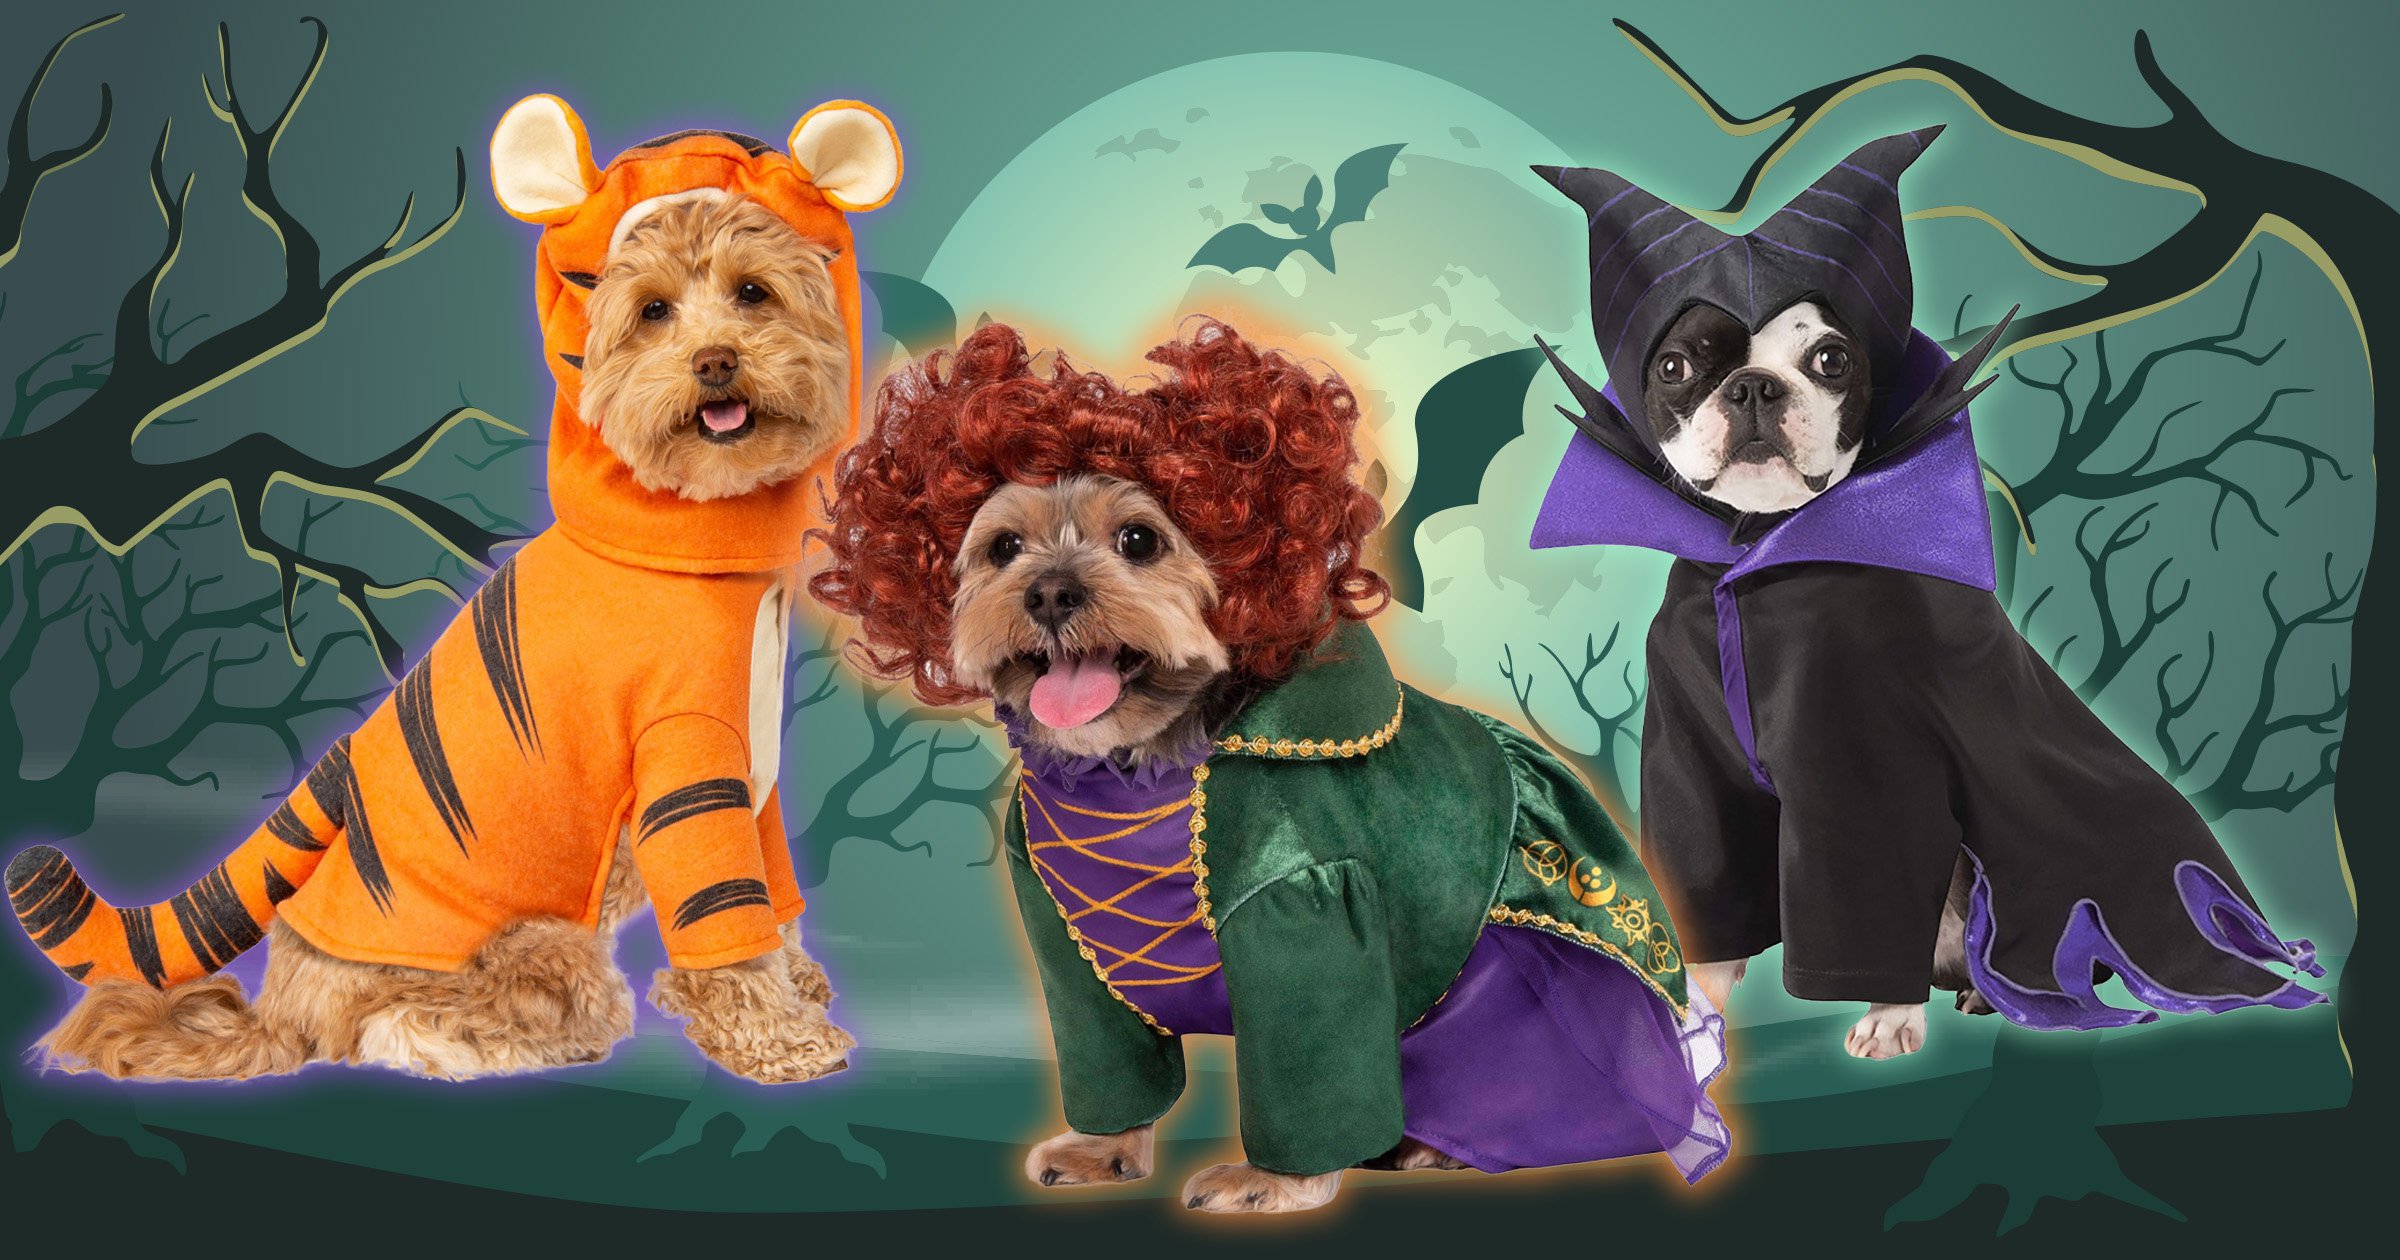 You can now dress your dog up in a Hocus Pocus costume for Halloween